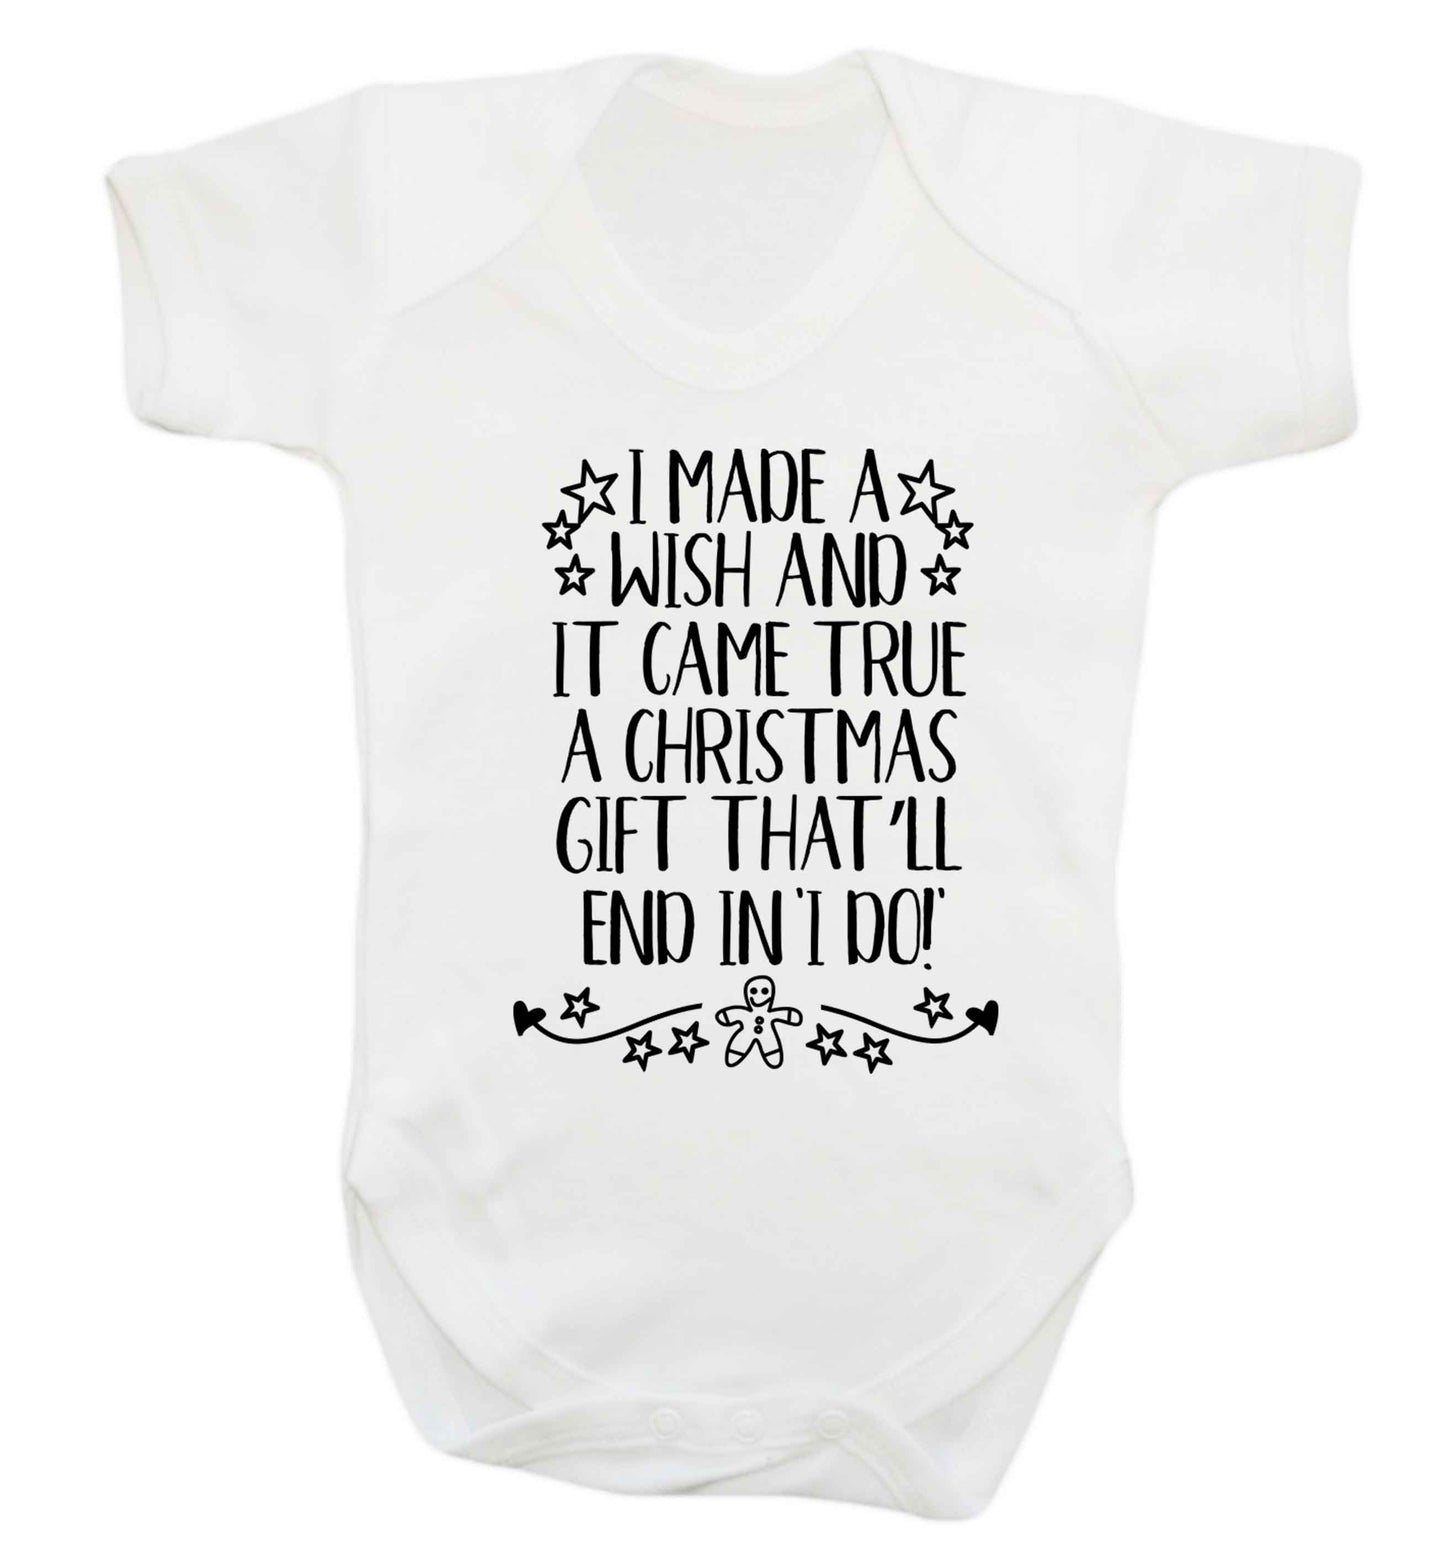 I made a wish and it came true a Christmas gift that'll end in 'I do' Baby Vest white 18-24 months